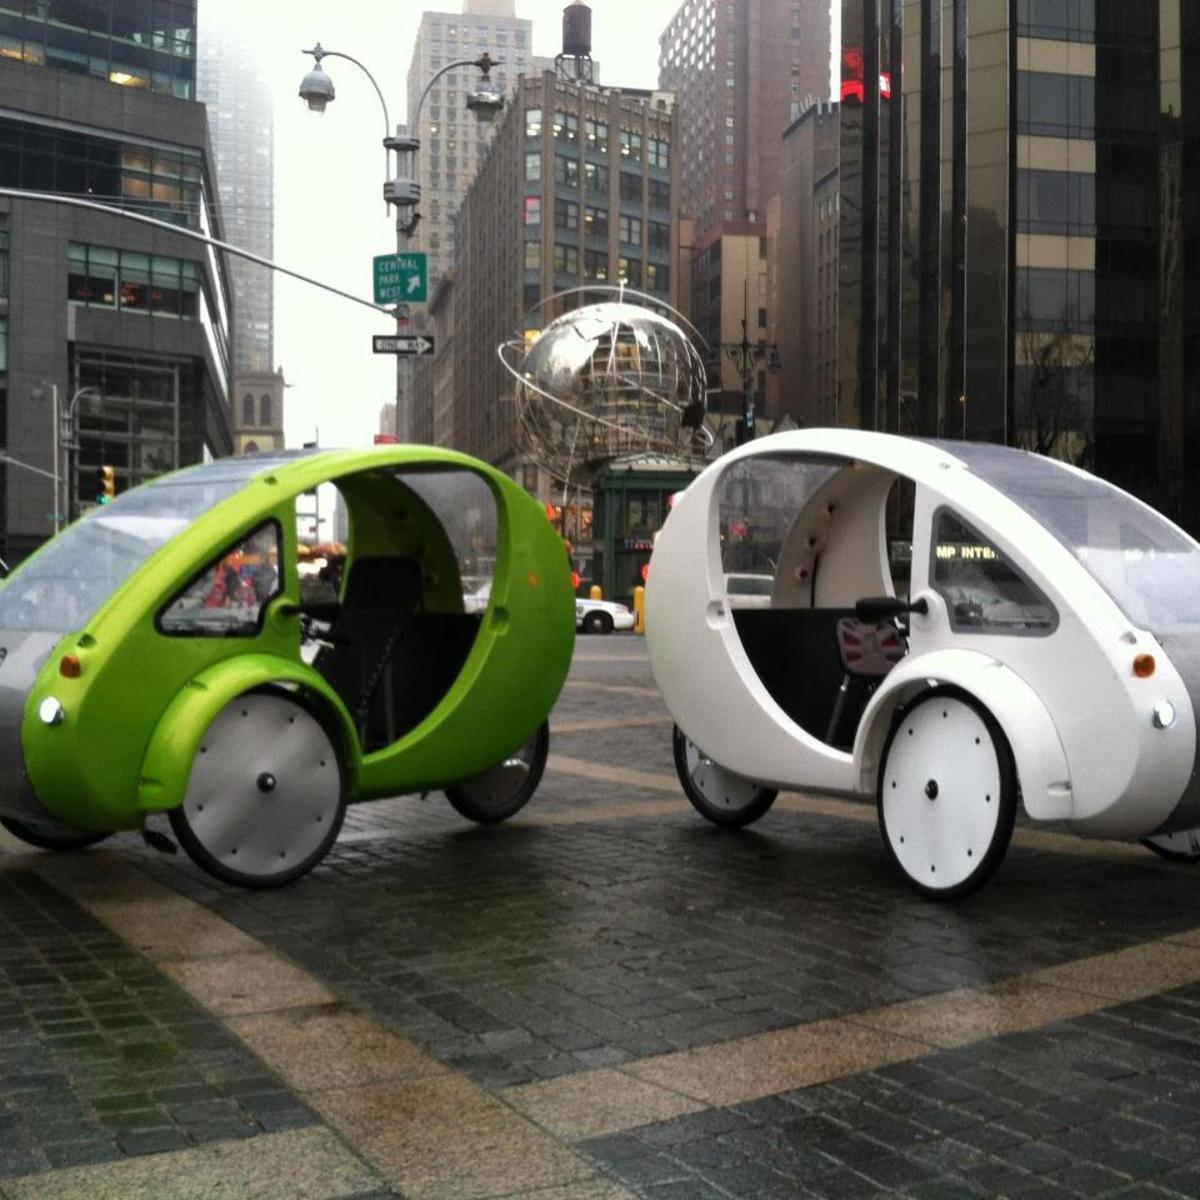 Organic Transit's ELF Vehicle: The Future of Transportation or a Fad?